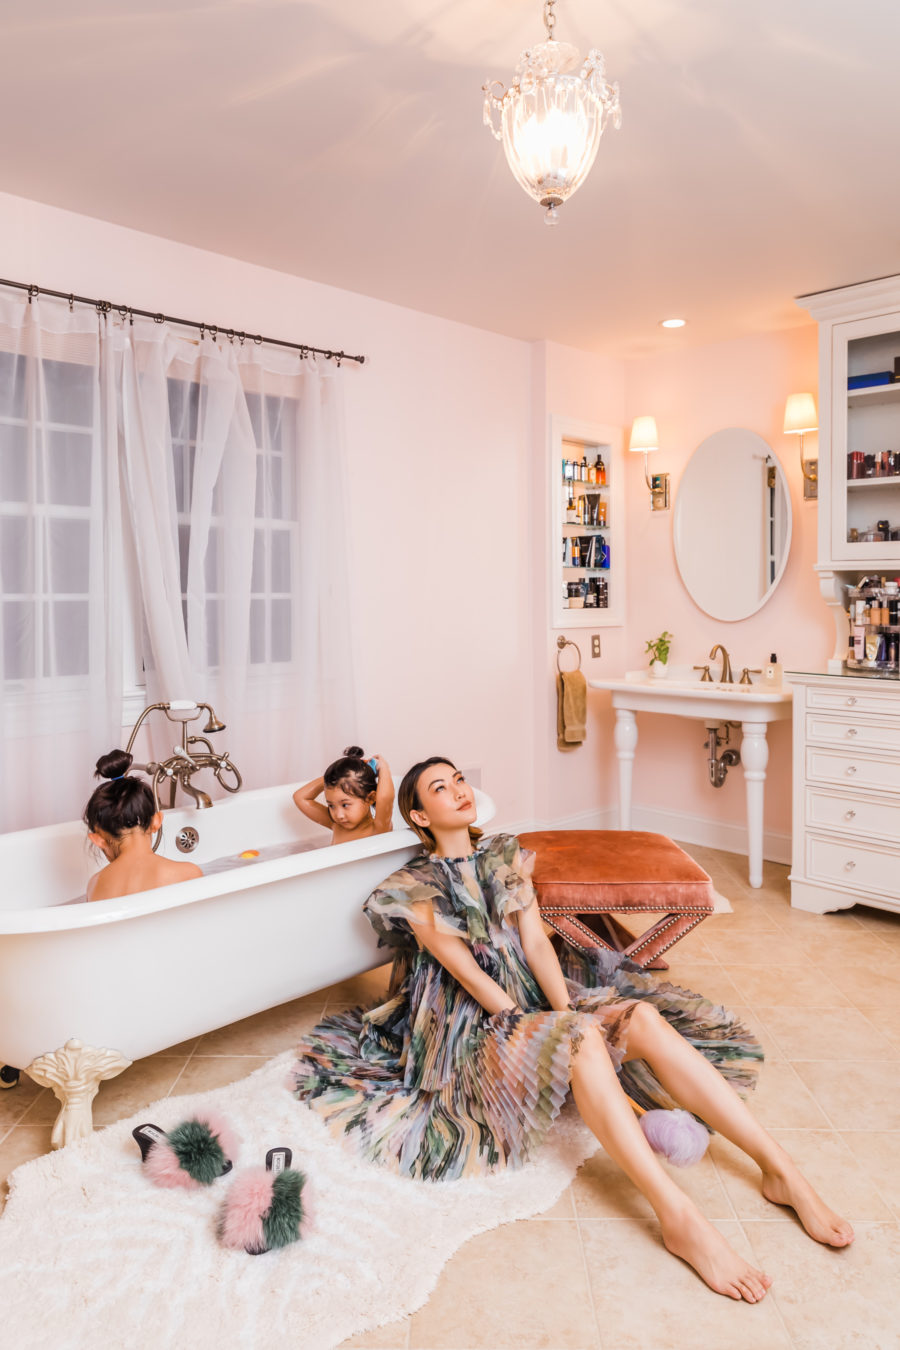 fashion blogger jessica wang in bathroom and shares her best mom hacks // Jessica Wang - Notjessfashion.com